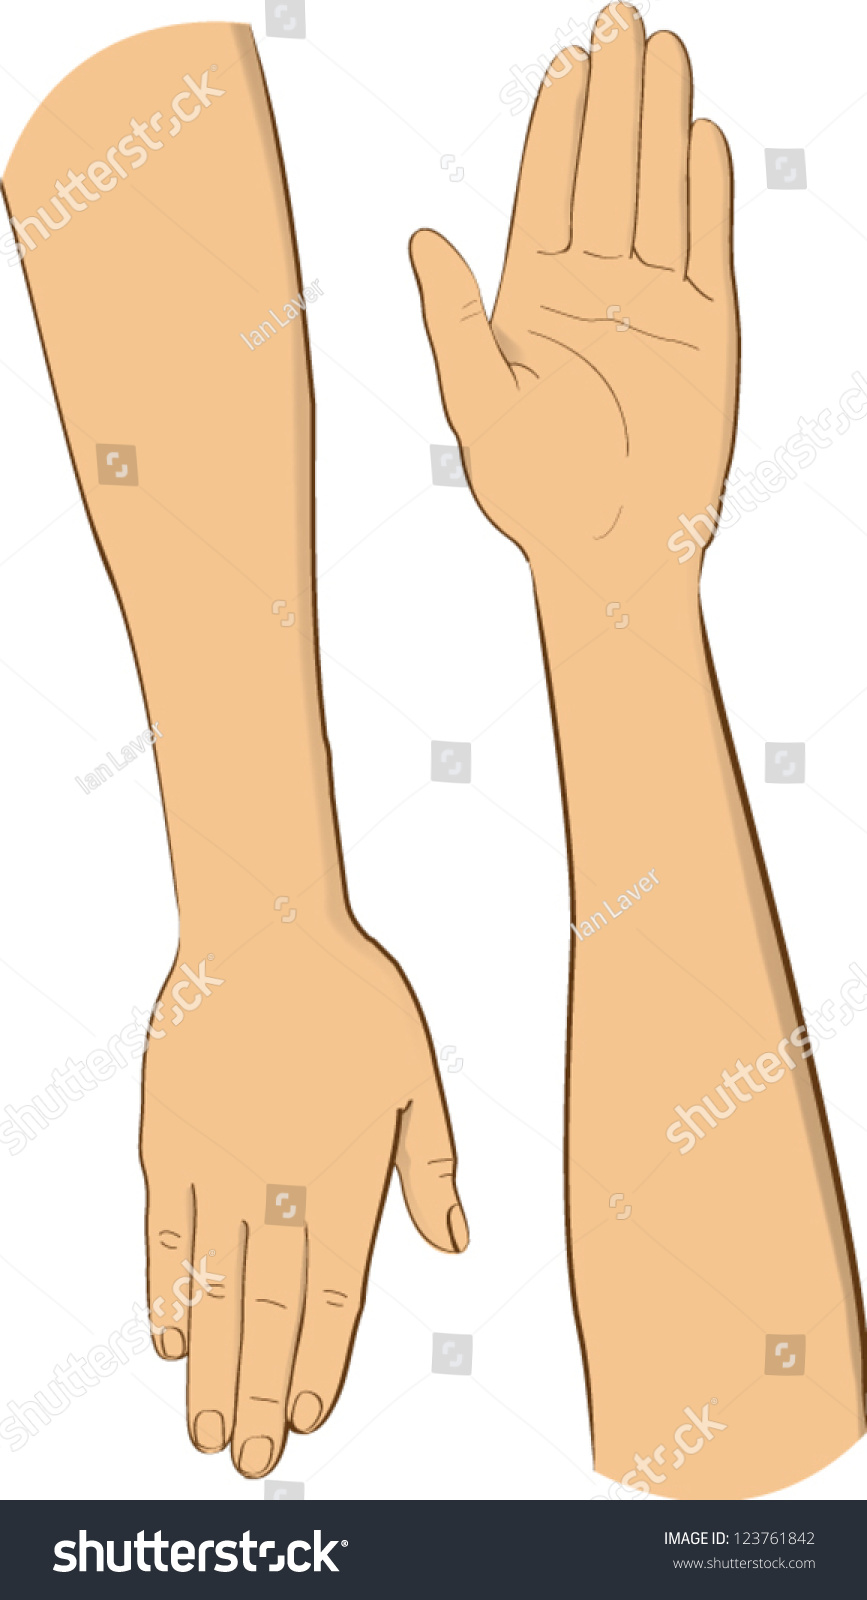 Vector Illustration Two Arms Hands Stock Vector 123761842 - Shutterstock